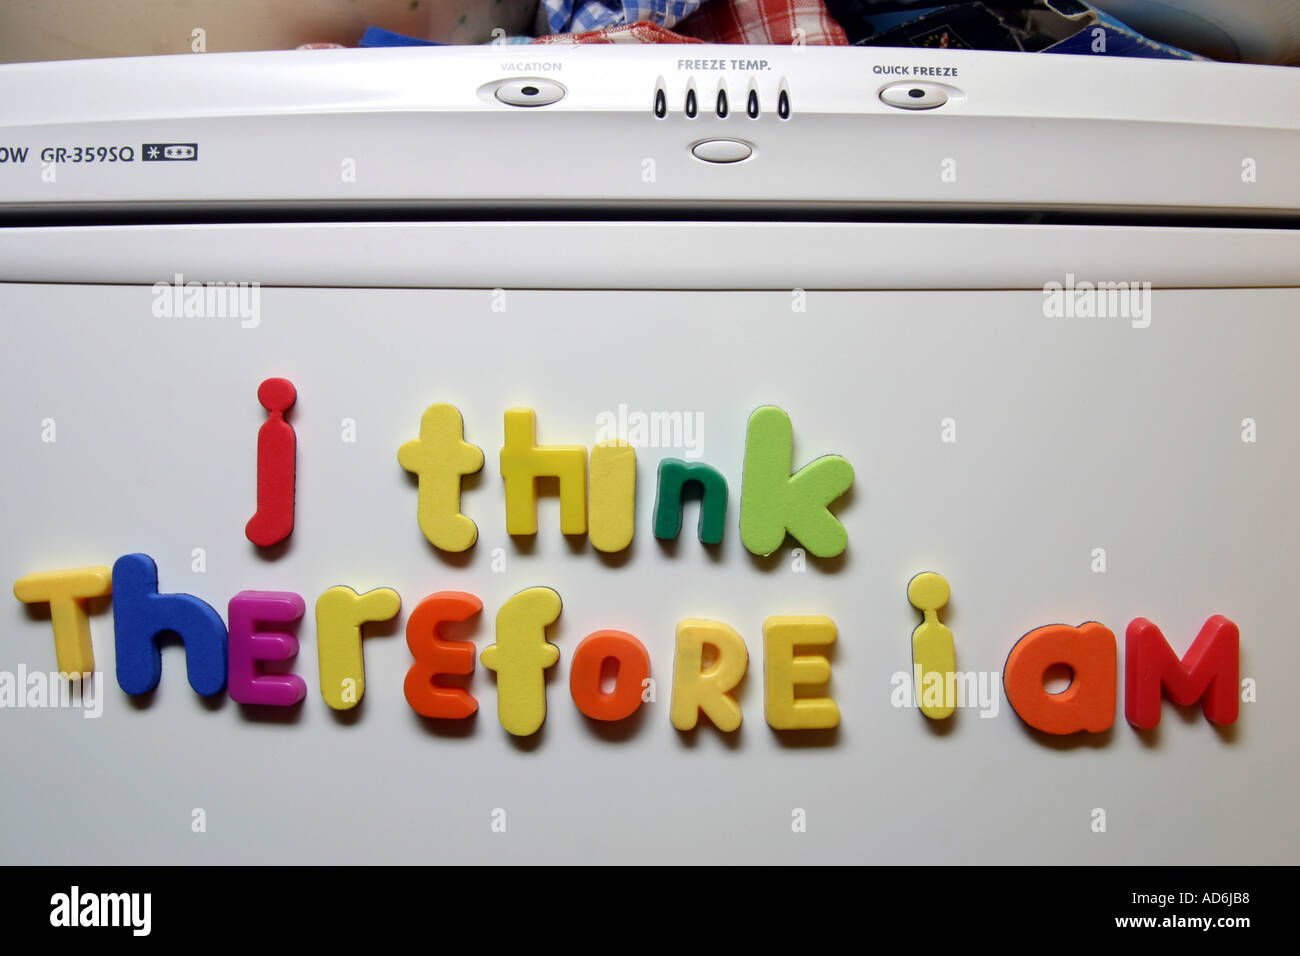 Descartes famous quote I think therefore I am written in fridge magnets on a refrigerator door Stock Photo